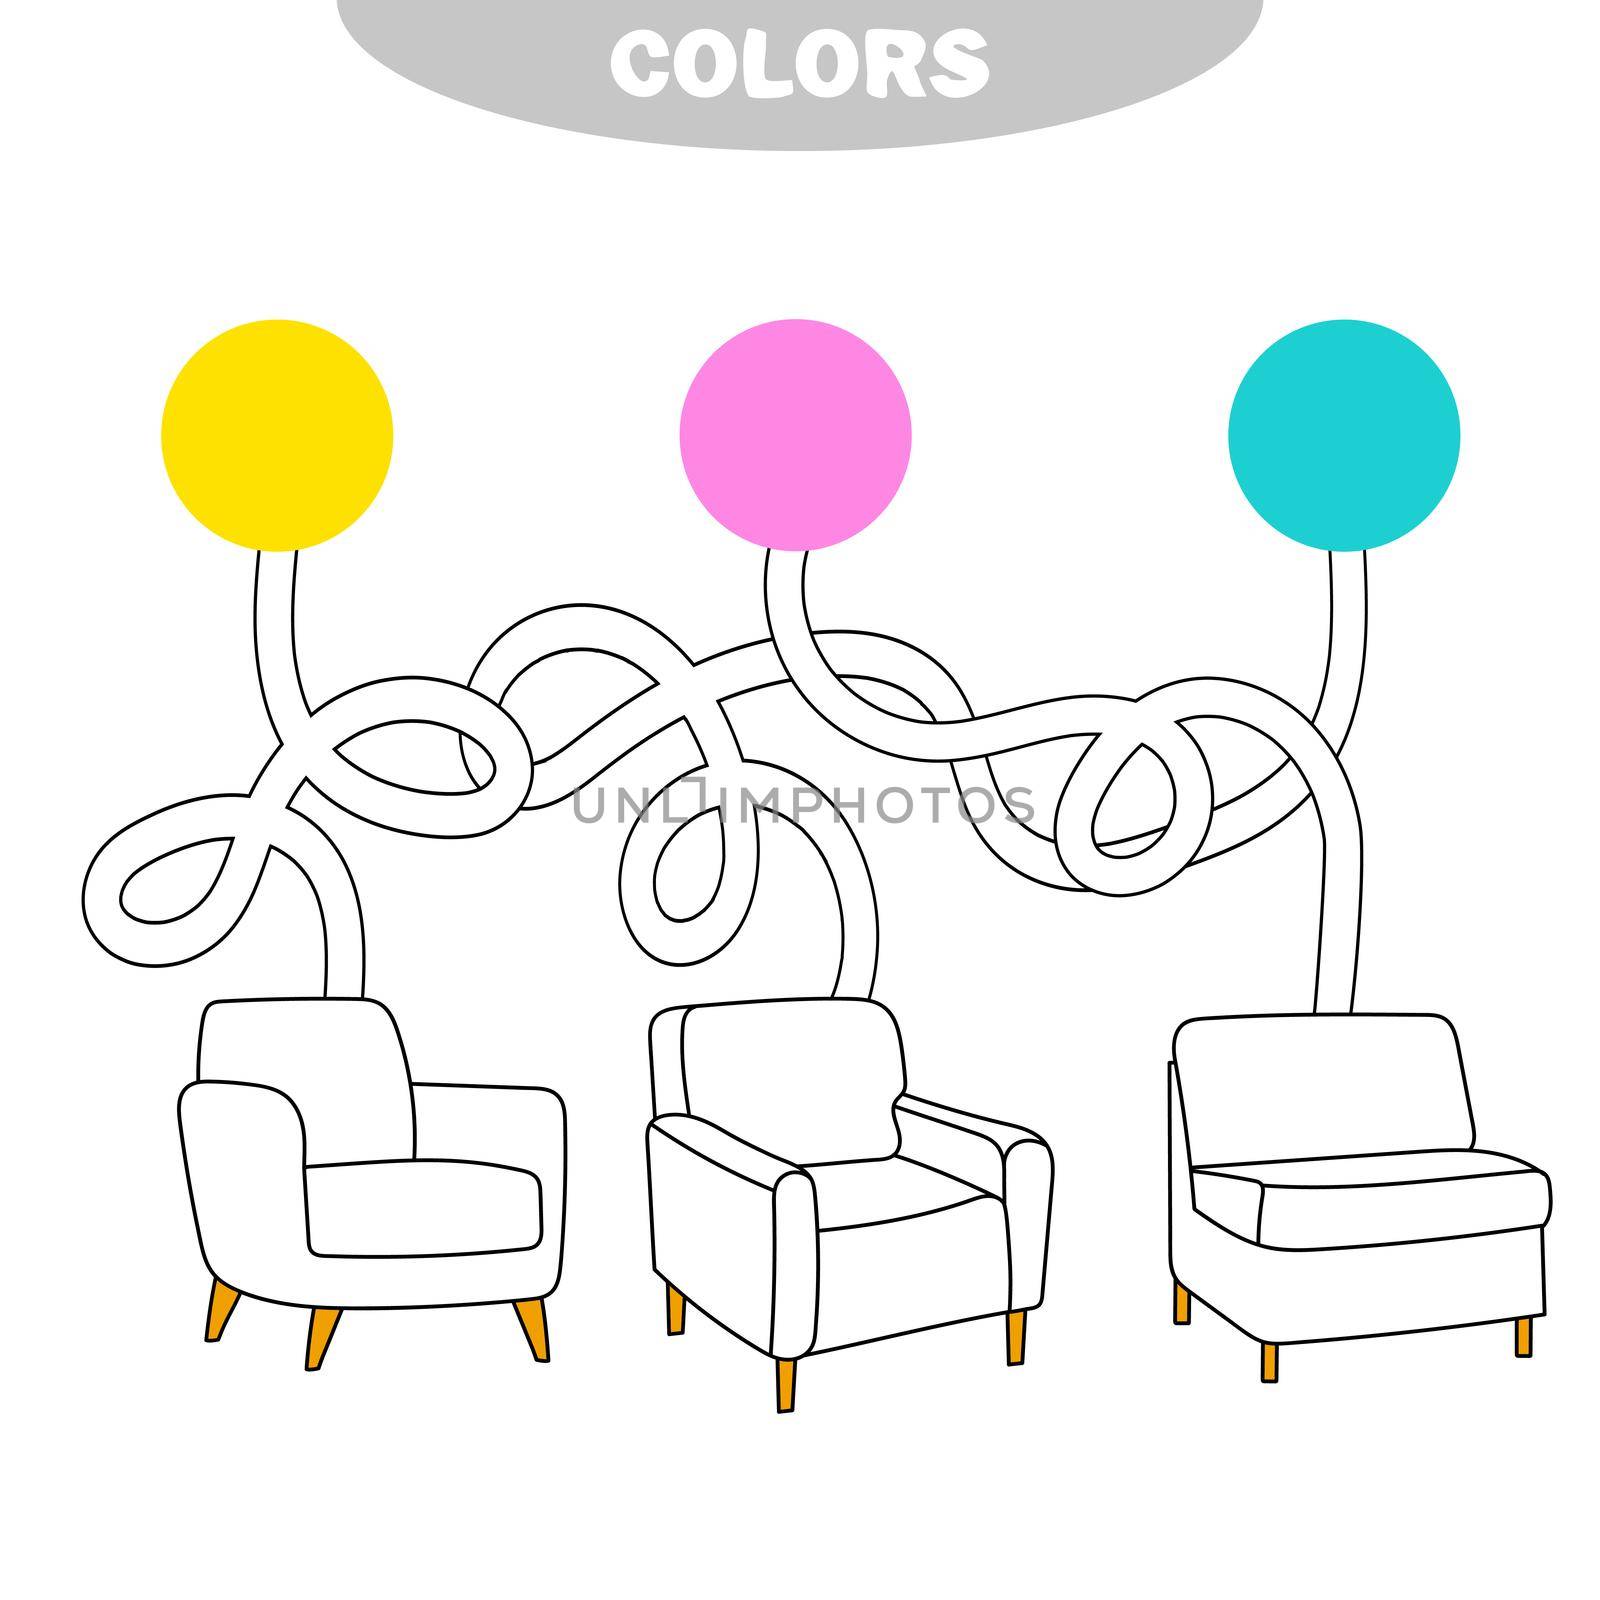 Pick a color and paint the chair the right color. Coloring book for children by natali_brill